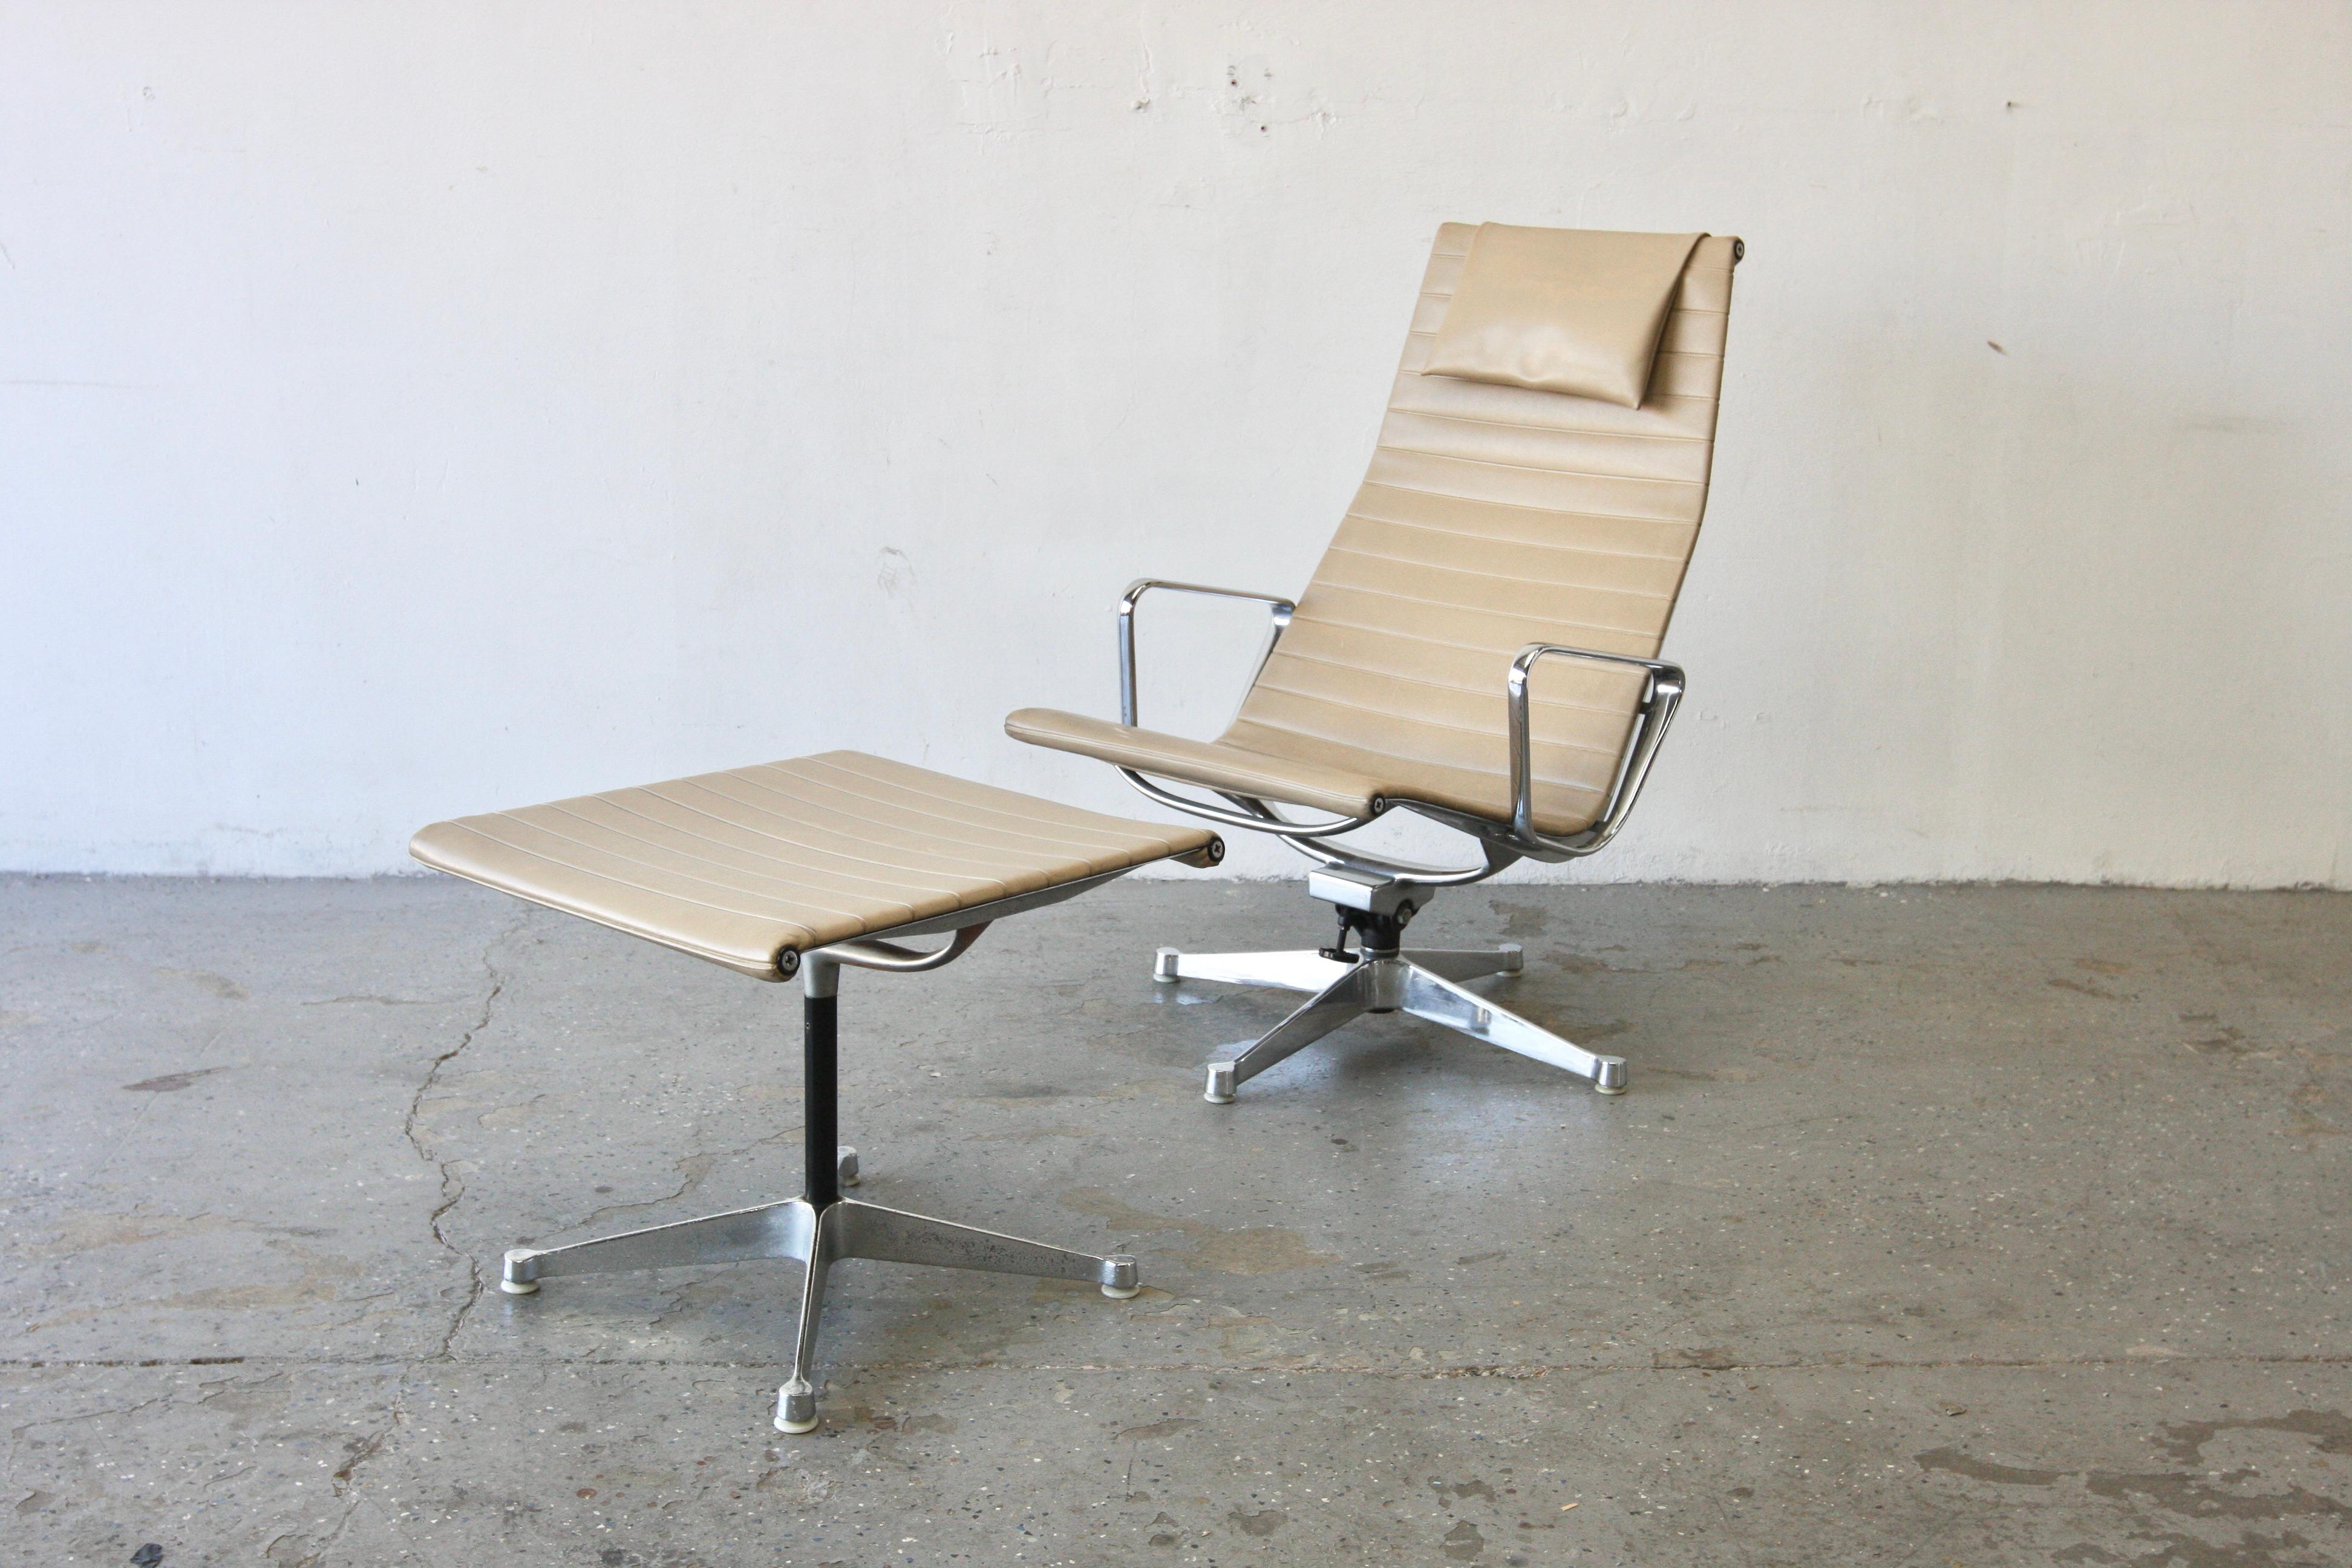 This is an original Iconic Eames Aluminum Group Lounge Chair and Matching Ottoman, Models EA124/EA125, originally designed by Charles and Ray Eames for Herman Miller in 1958. This  set was produced in the late 60’s or early 70’s . The pieces sport